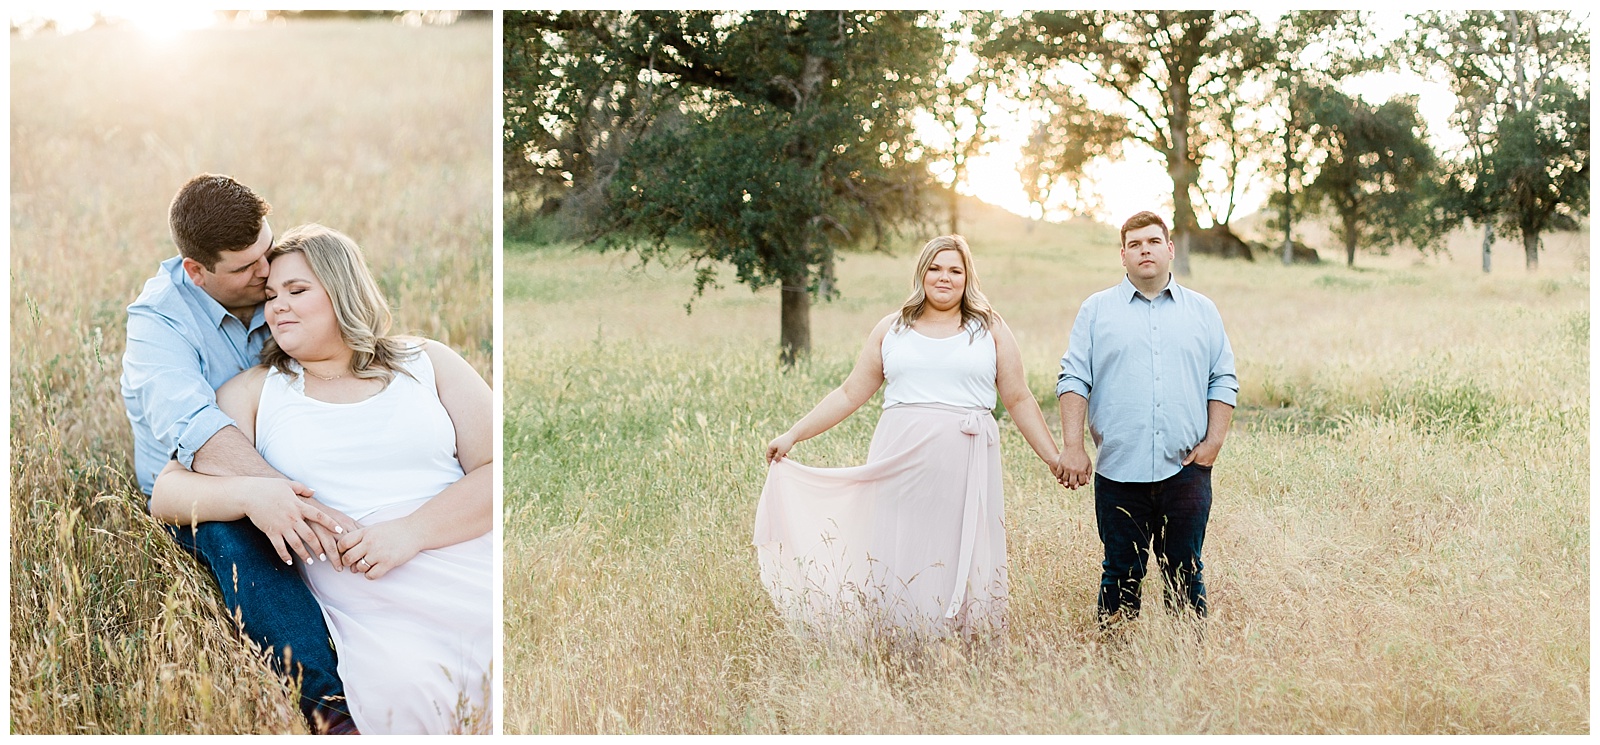 blush and light blue engagement photo outfit ideas and poses